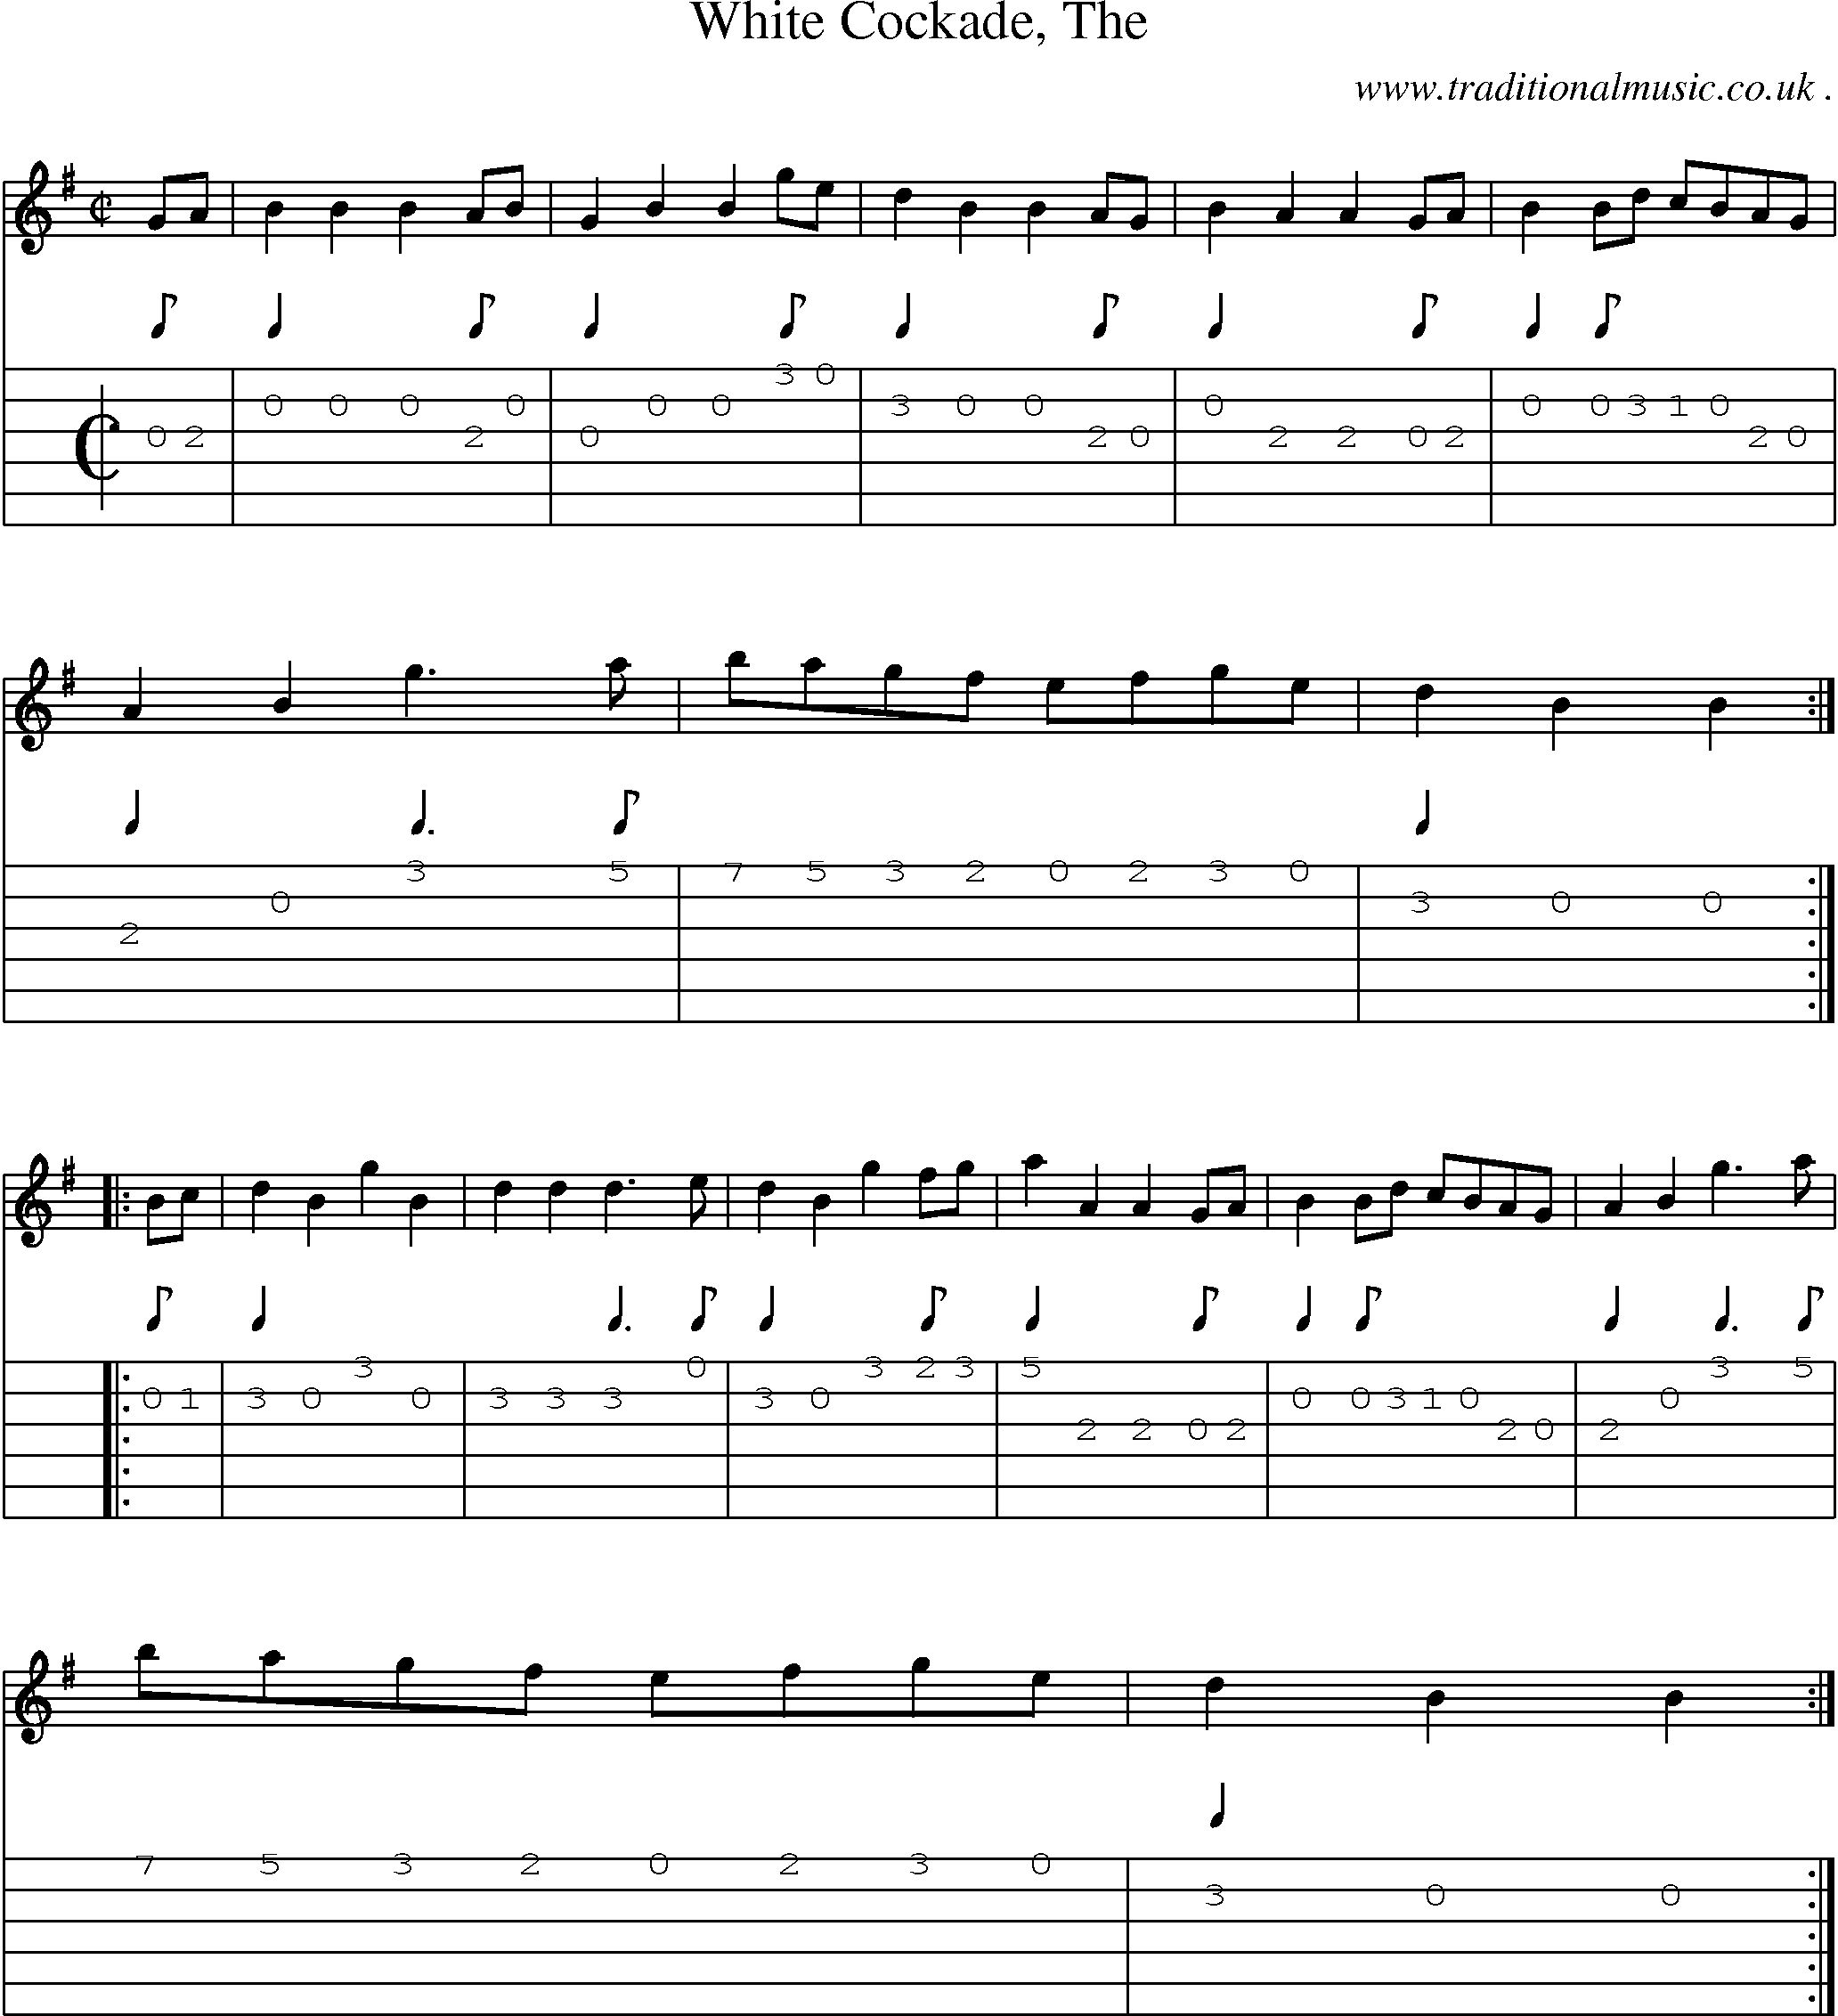 Sheet-music  score, Chords and Guitar Tabs for White Cockade The